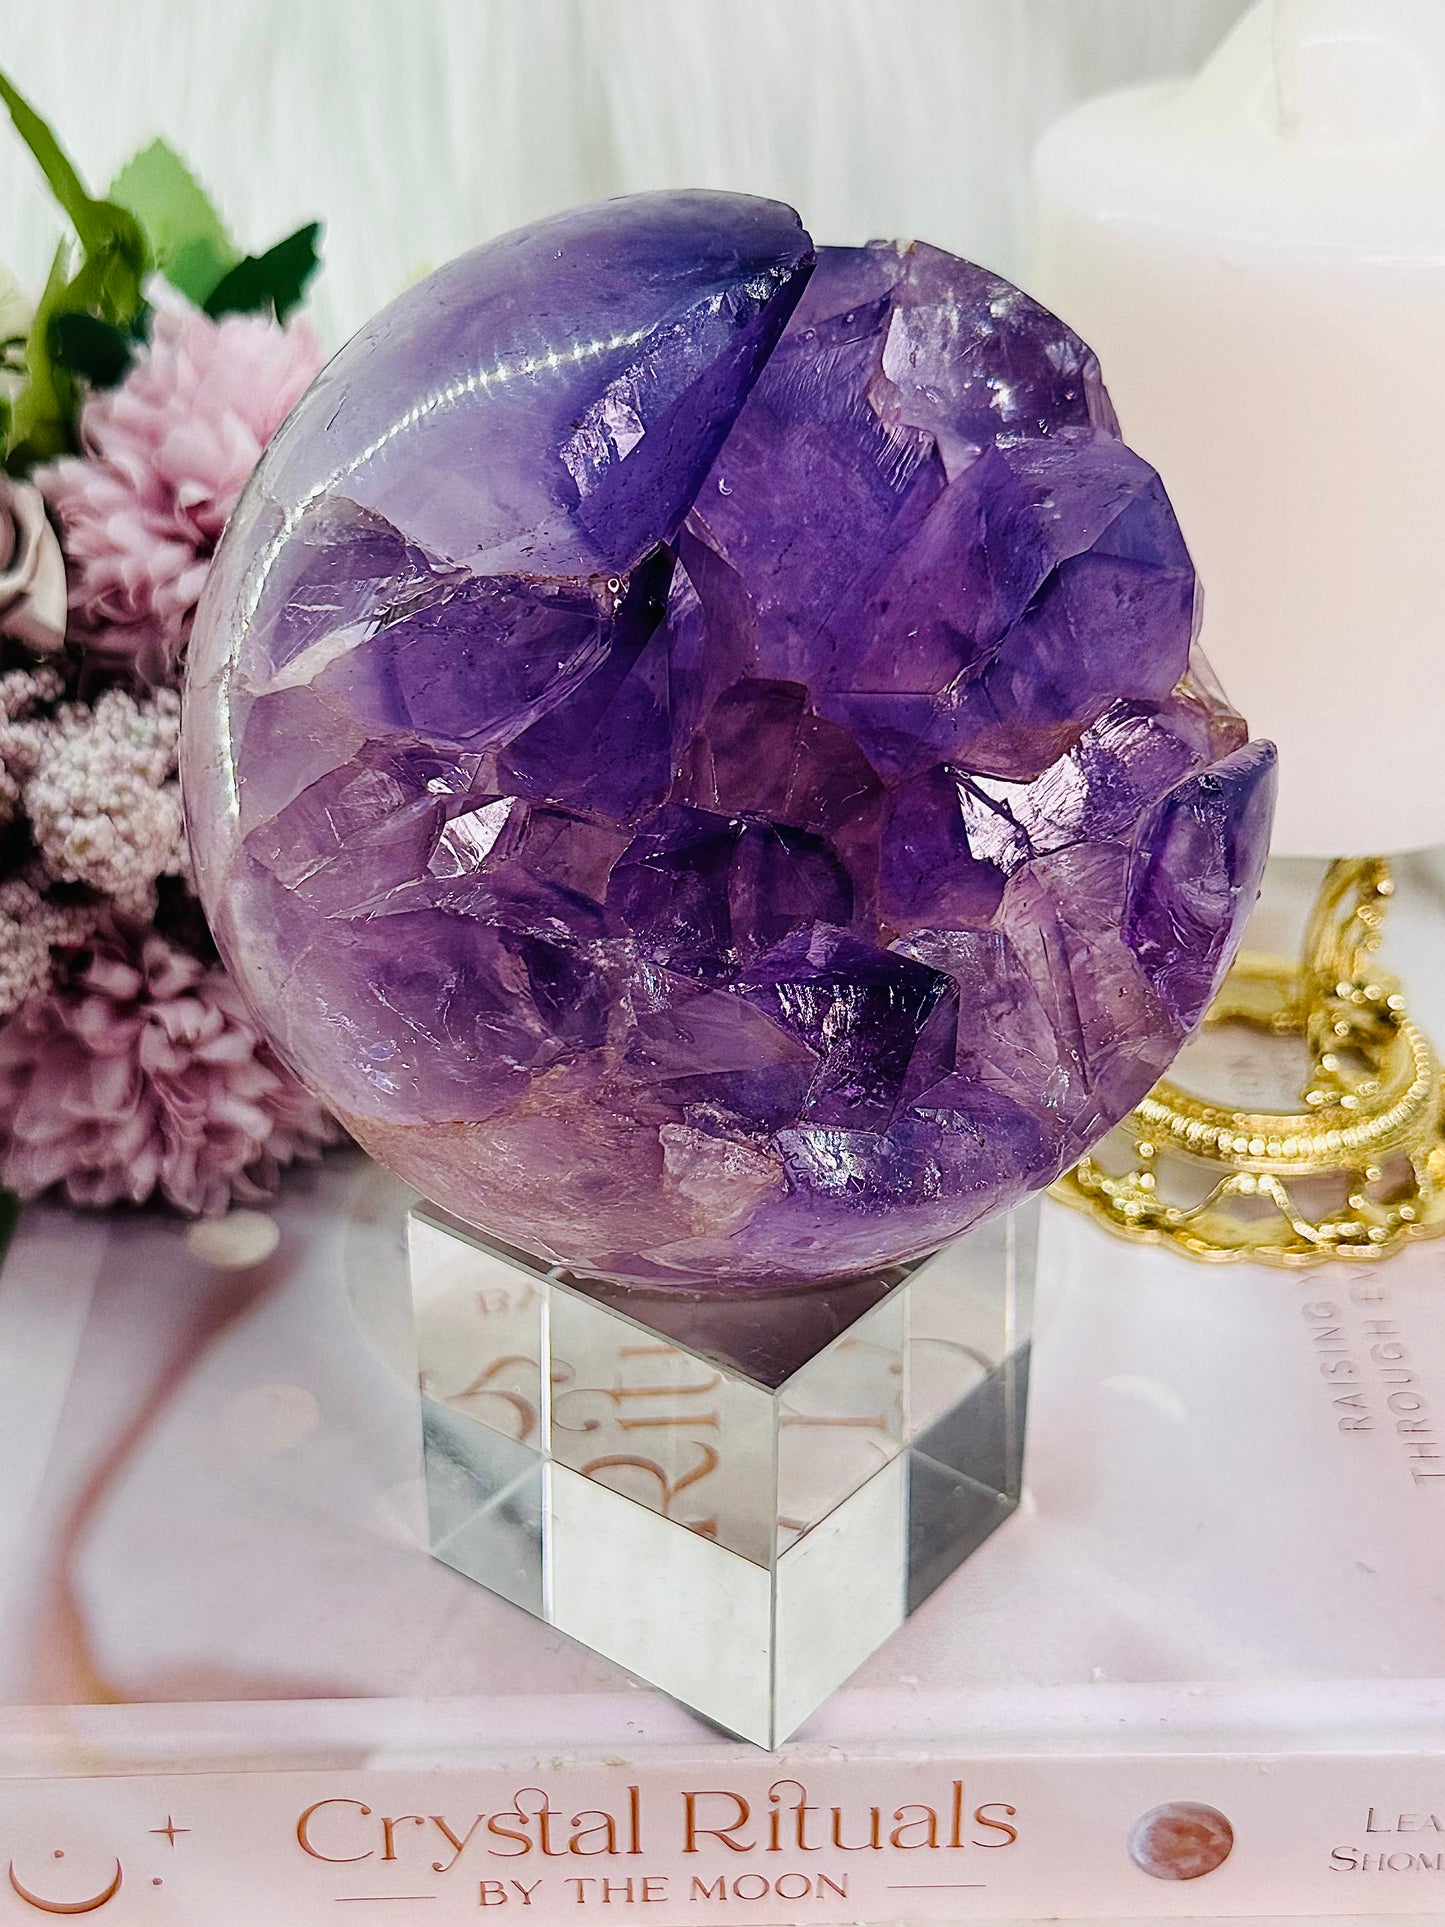 ⚜️ SALE ⚜️Classy & Fabulous ~ Absolutely HUGE Stunning MASTERPIECE!!! Glorious 1.32KG Amethyst Druzy Sphere with Large Points & Rainbows From Brazil On Stand